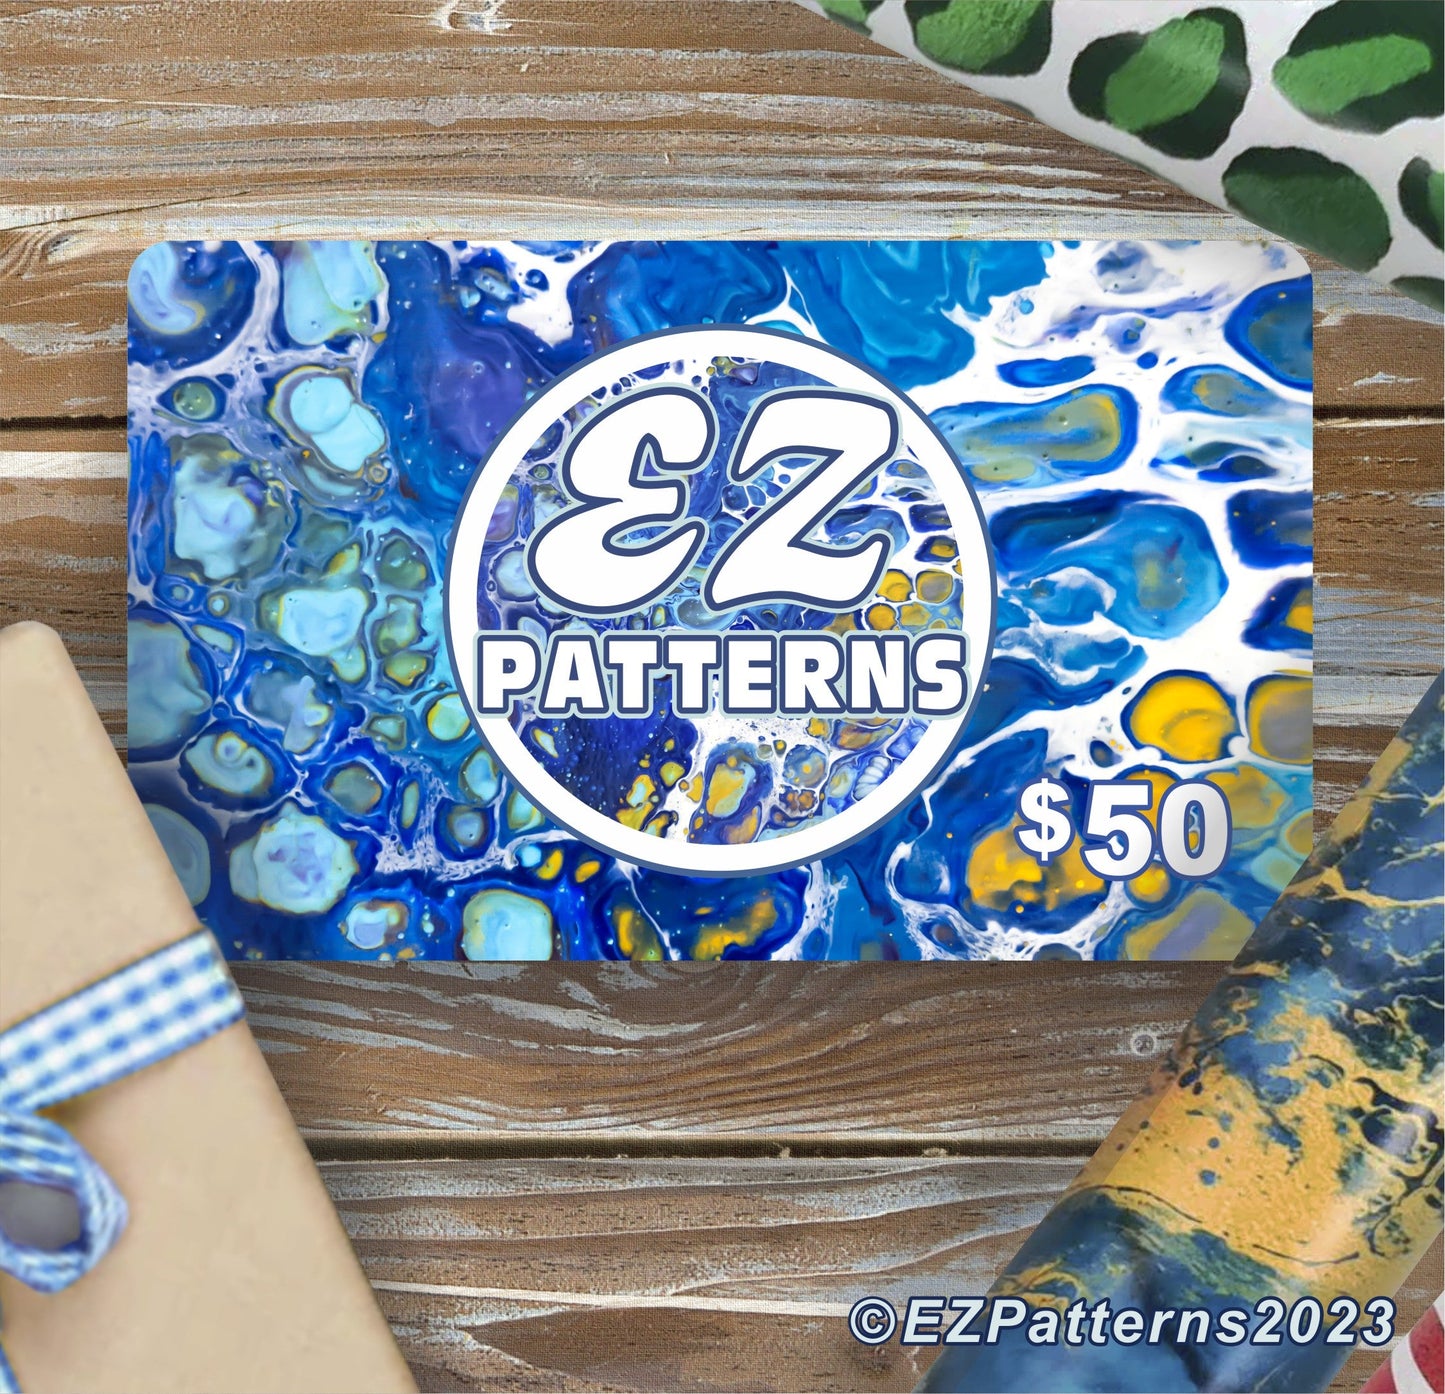 Ez Patterns Gift Card Cards